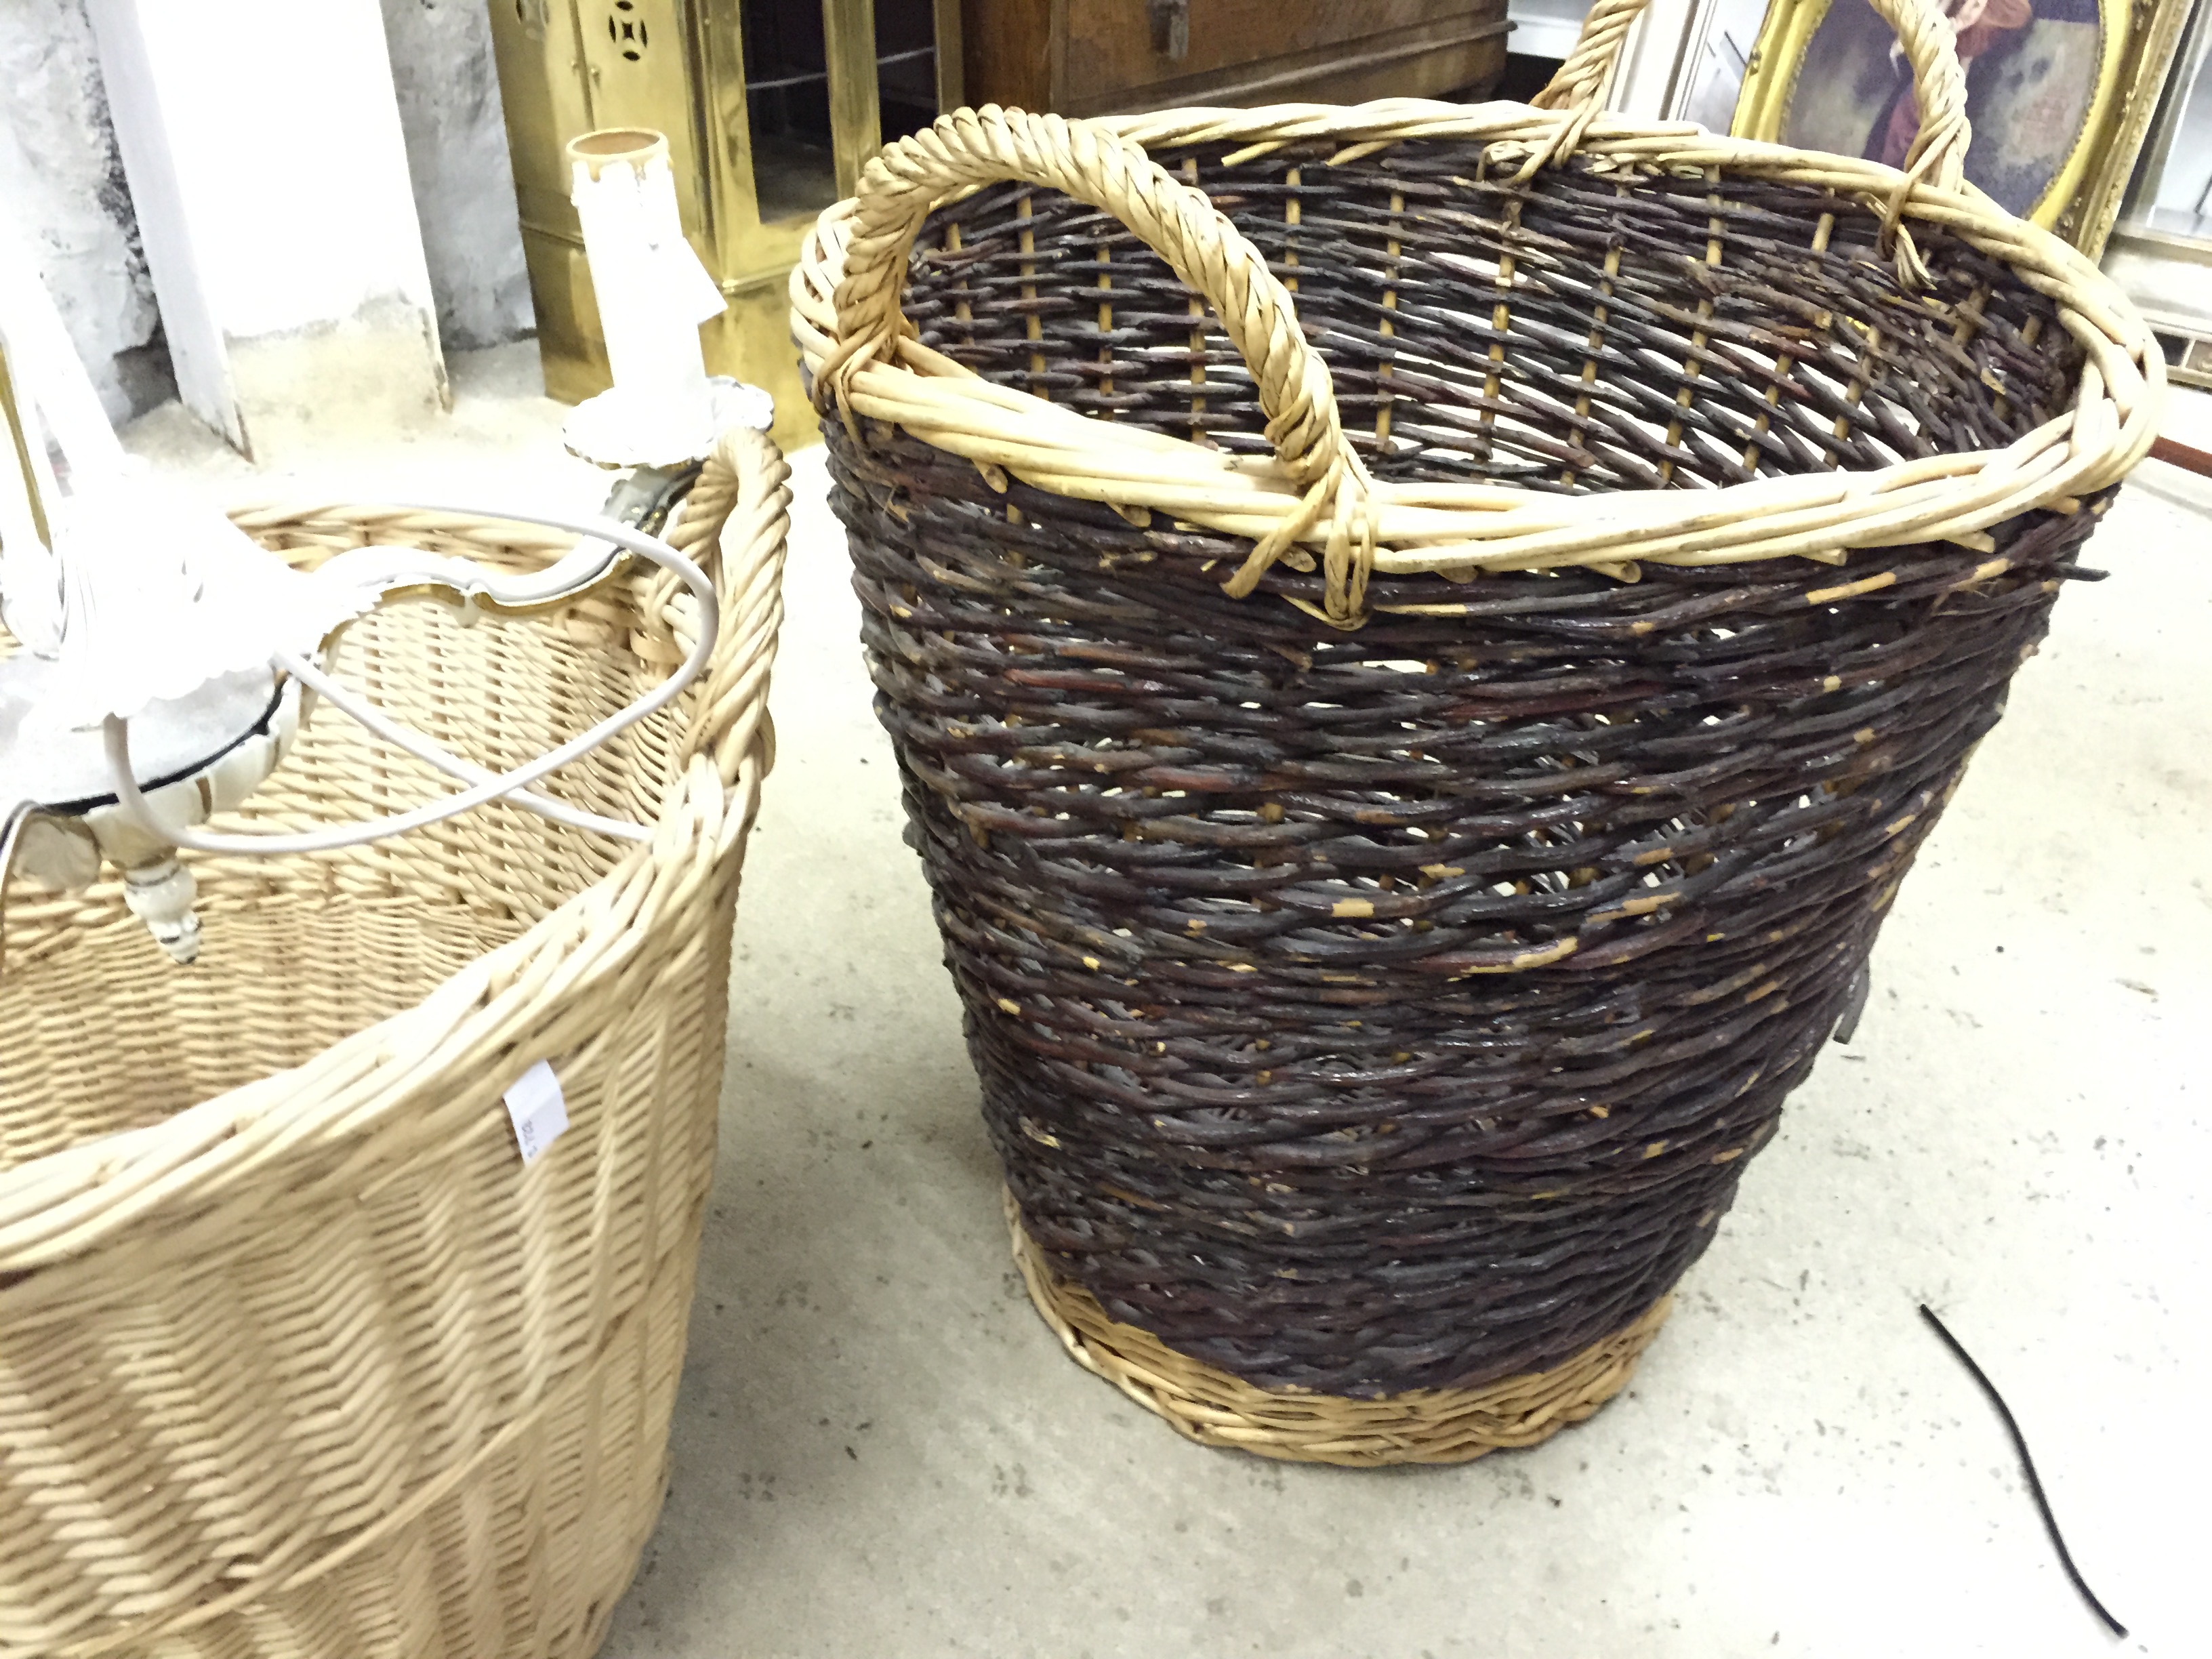 Two wicker baskets and a light fitting. - Image 3 of 3